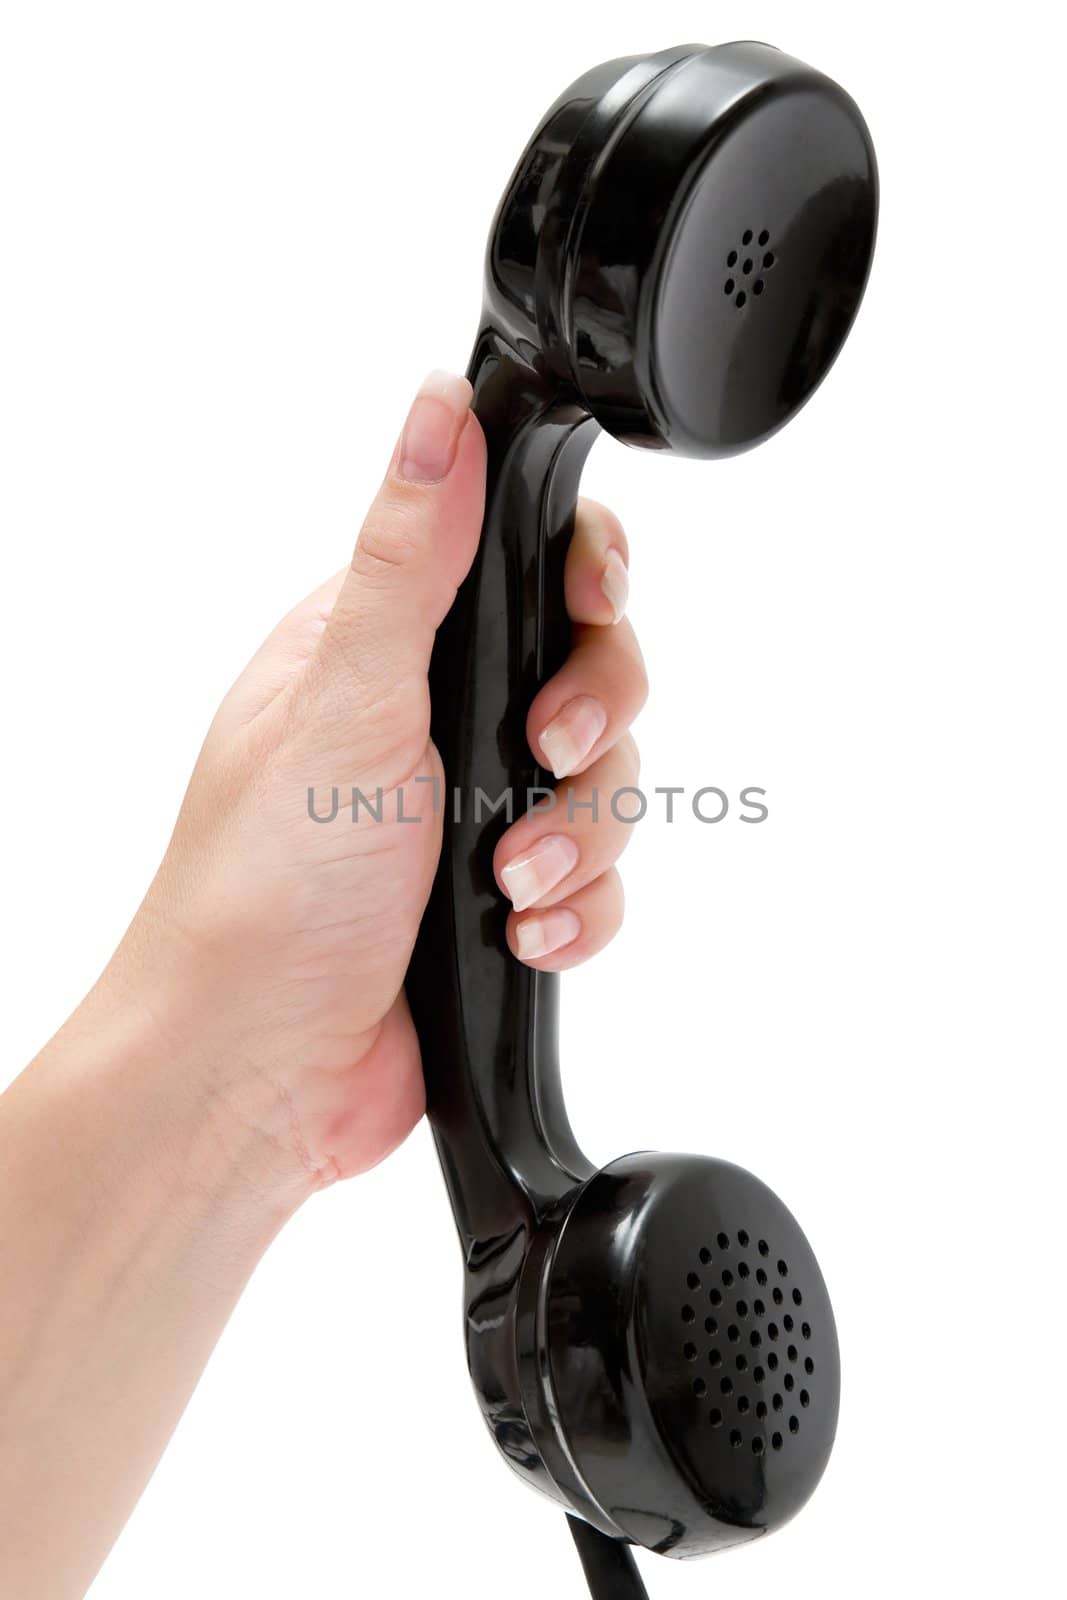 Holding a vintage Handset by winterling